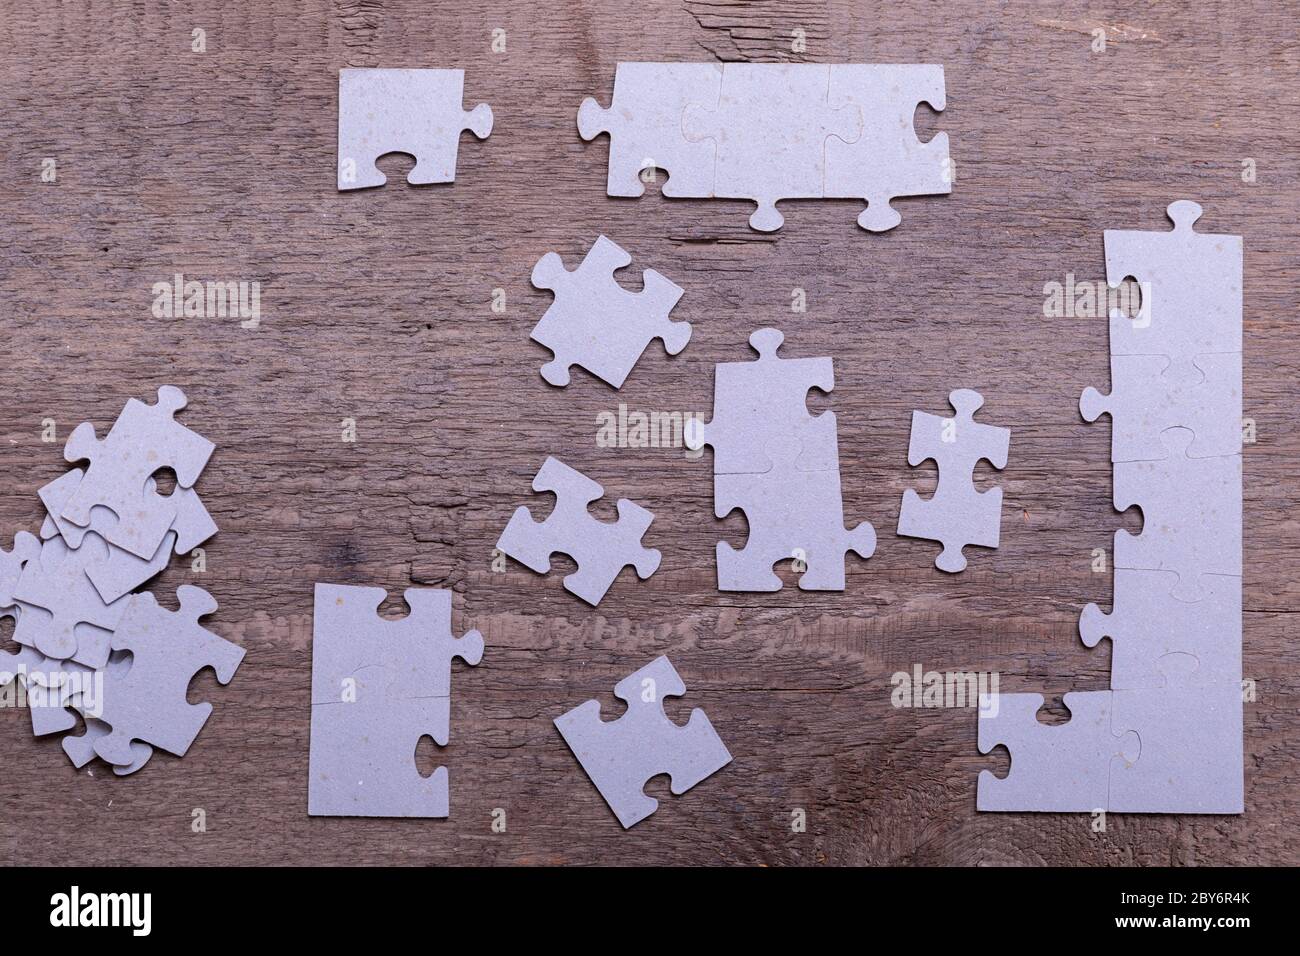 Jigsaw puzzle pieces lying on old wooden rustic boards. Conceptual of innovation, solution finding and integration. Stock Photo